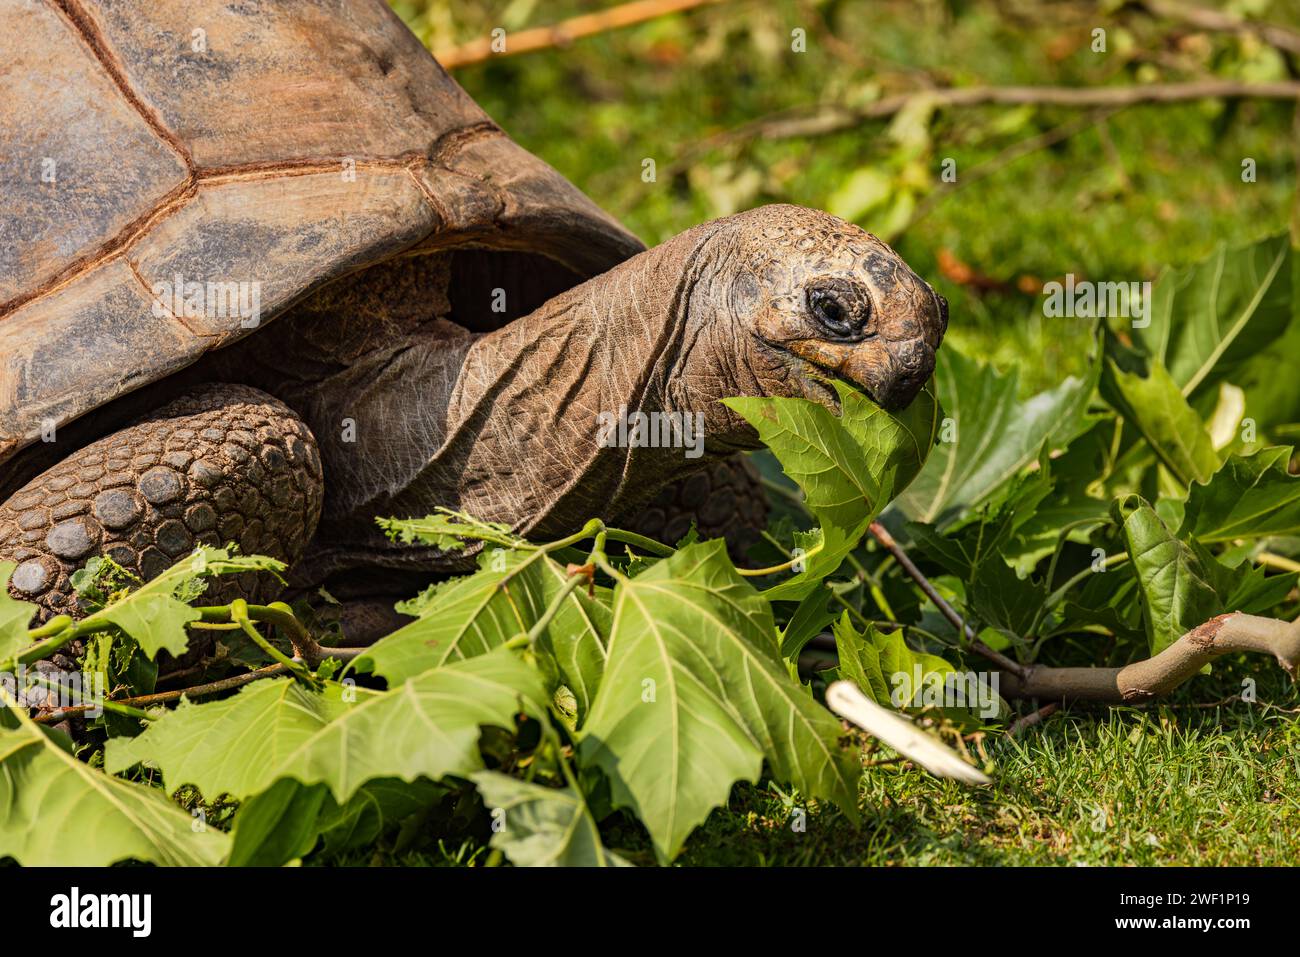 Head with mouth and neck of a giant tortoise eating leaves as food Stock Photo